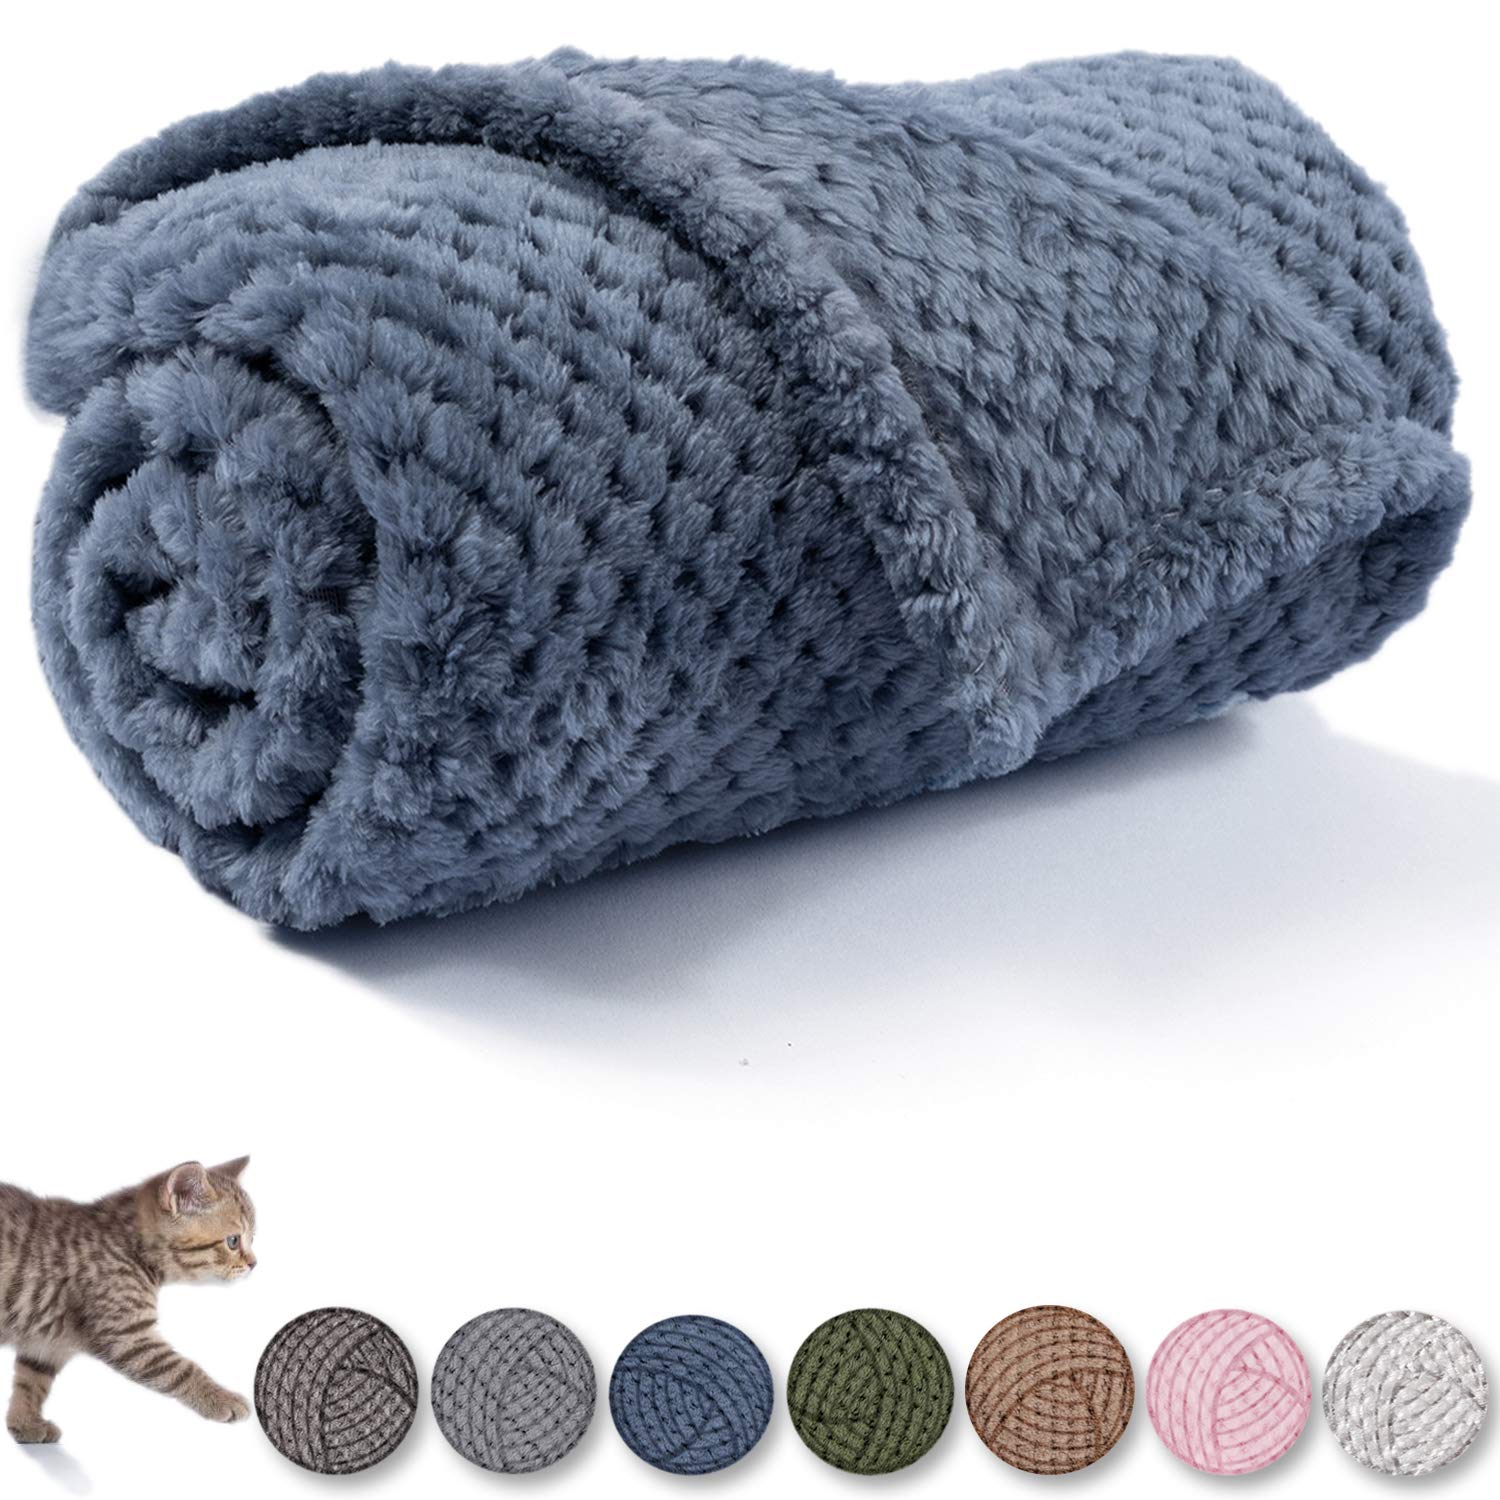 CUTEMATE Dog Blanket or cat Blanket or Pet Blanket, Warm Soft Fuzzy Blankets for Puppy, Small, Medium, Large Dogs or Kitten, cats, Plush 